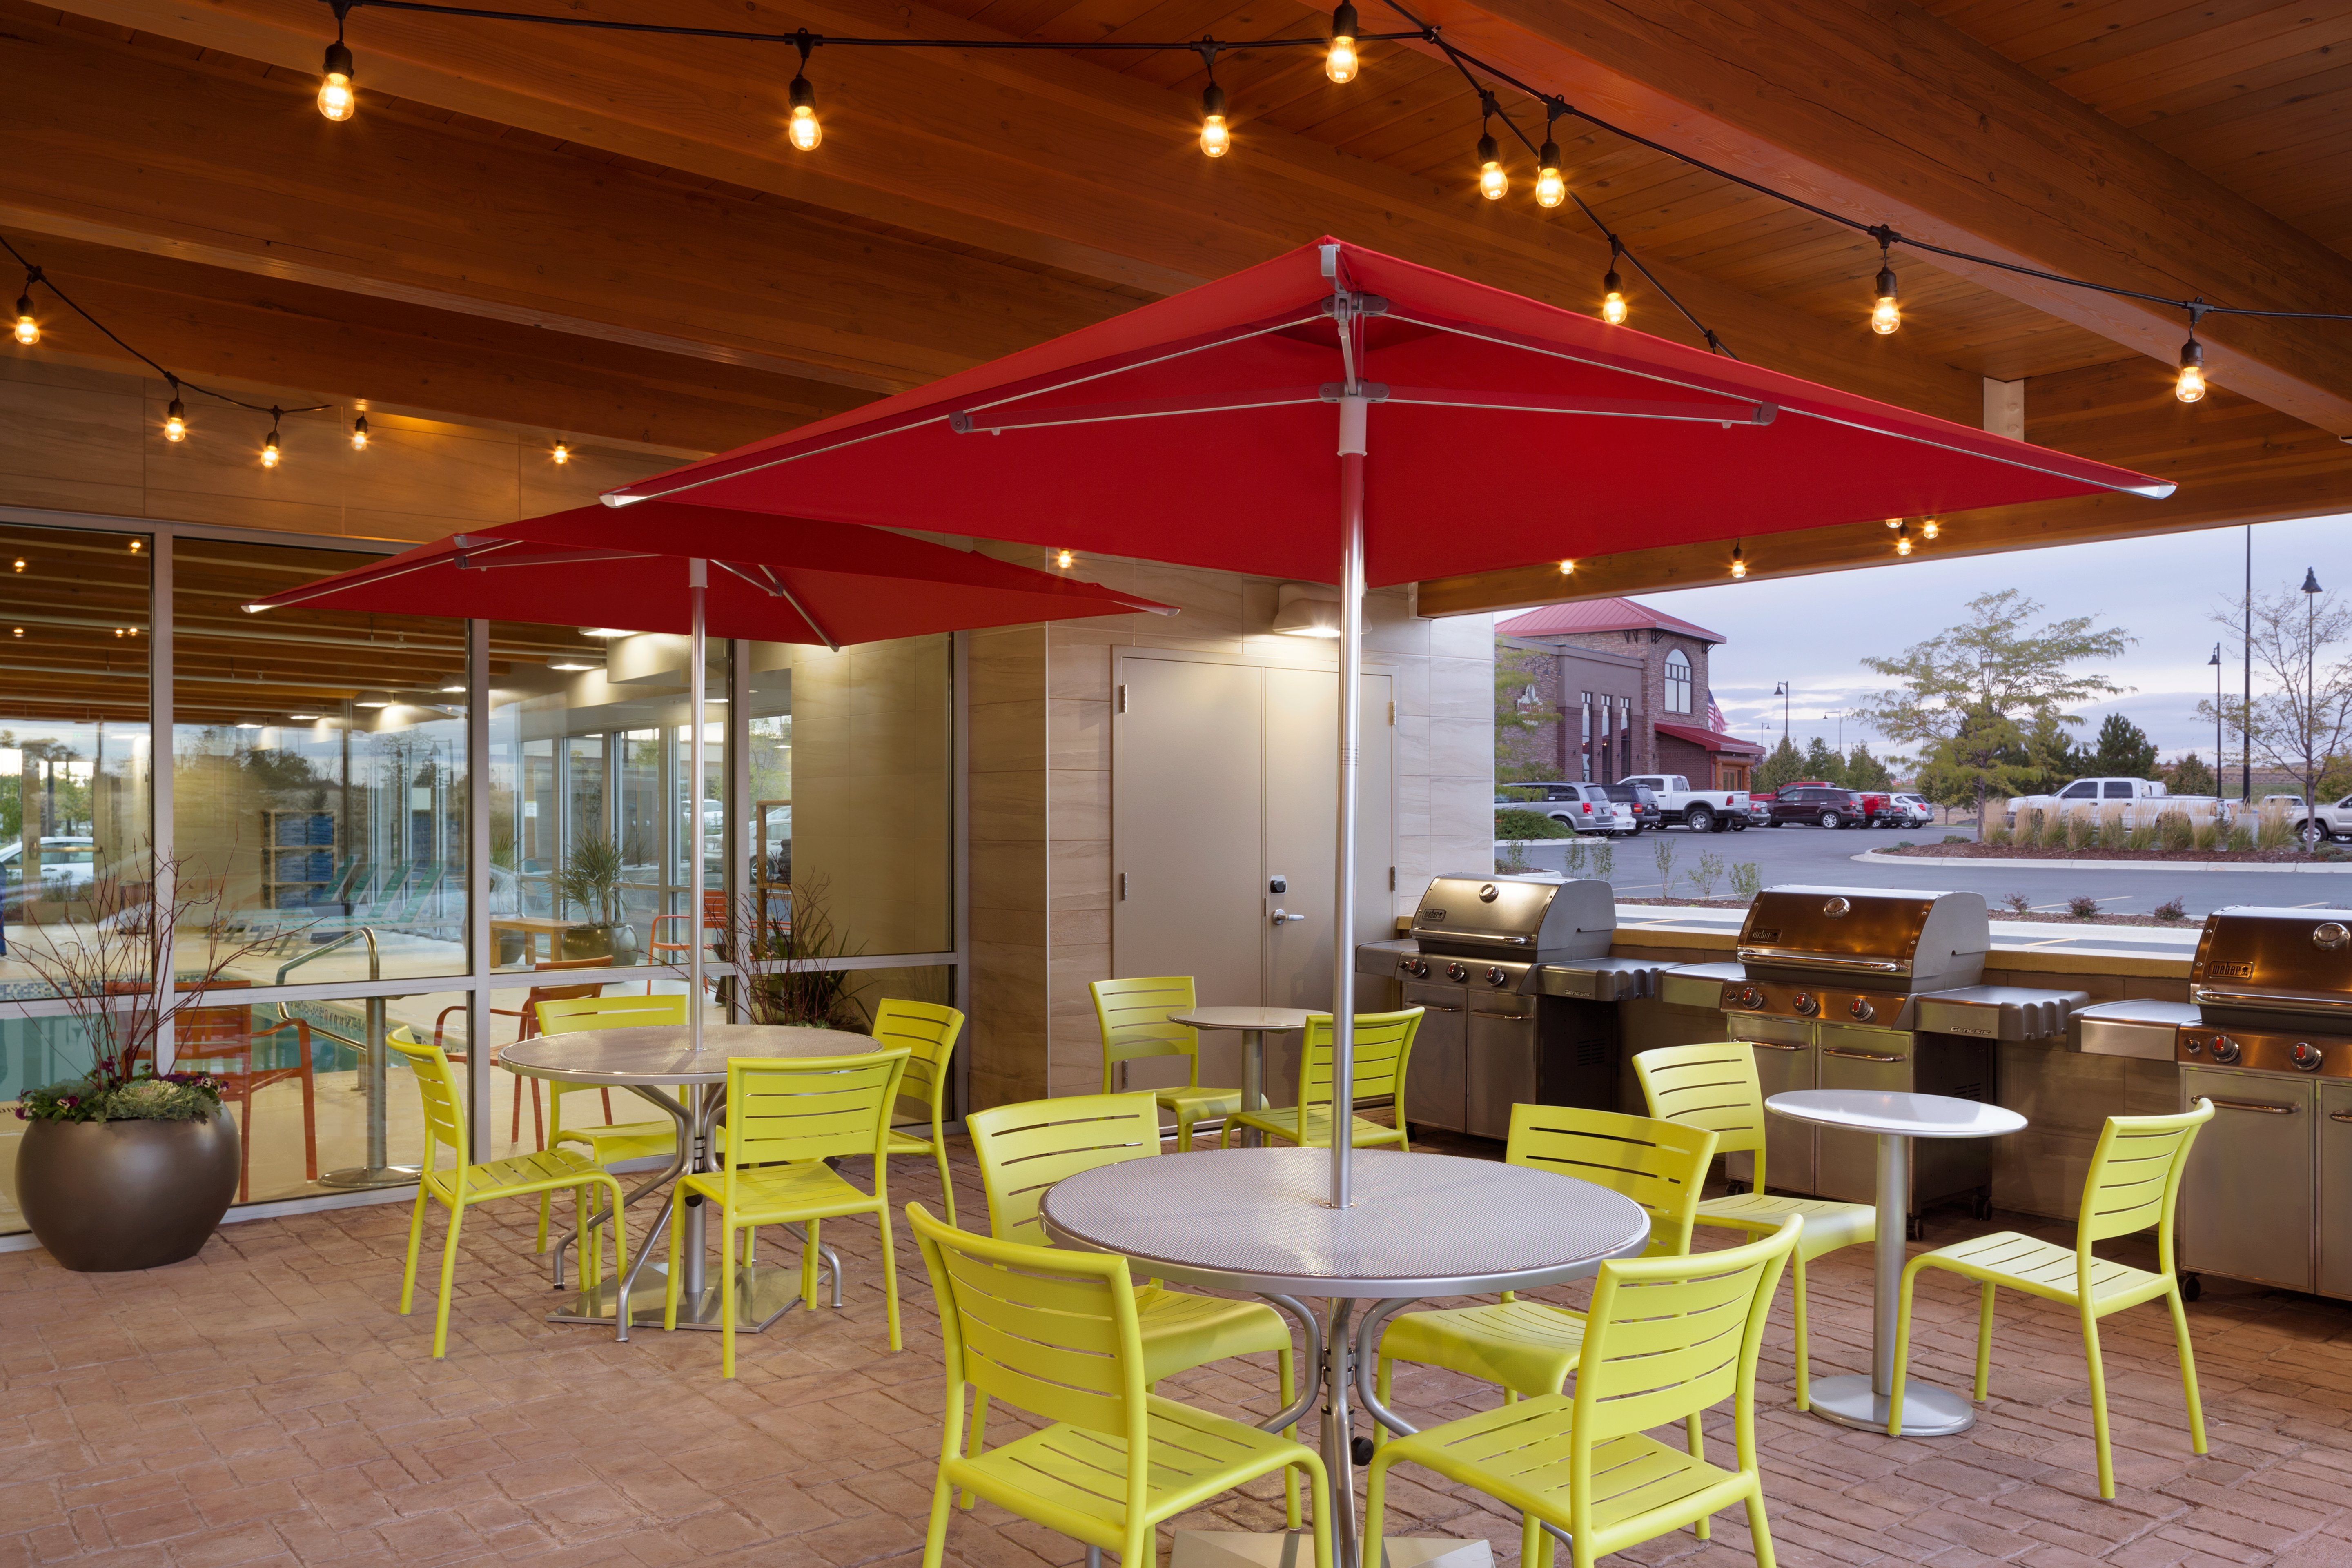 Illuminated Outdoor Patio With Green Chairs, Red Umbrellas Tables, and Three Barbecue Grills at Dusk 